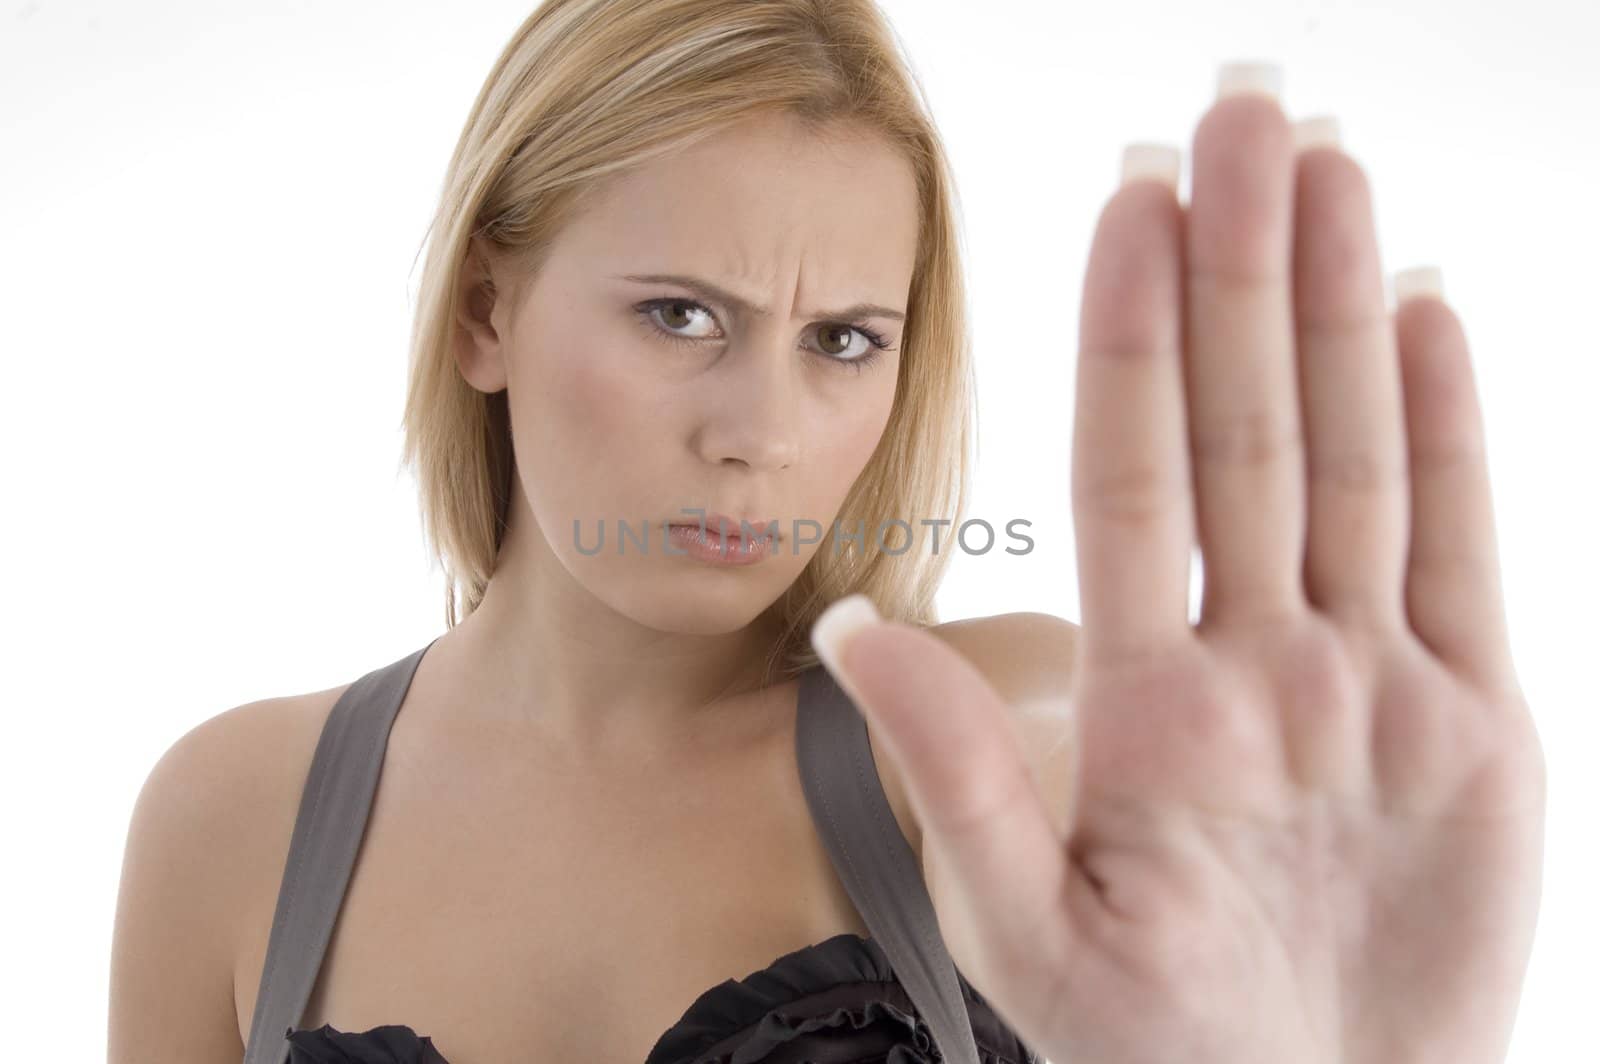 angry woman showing stopping gesture by imagerymajestic